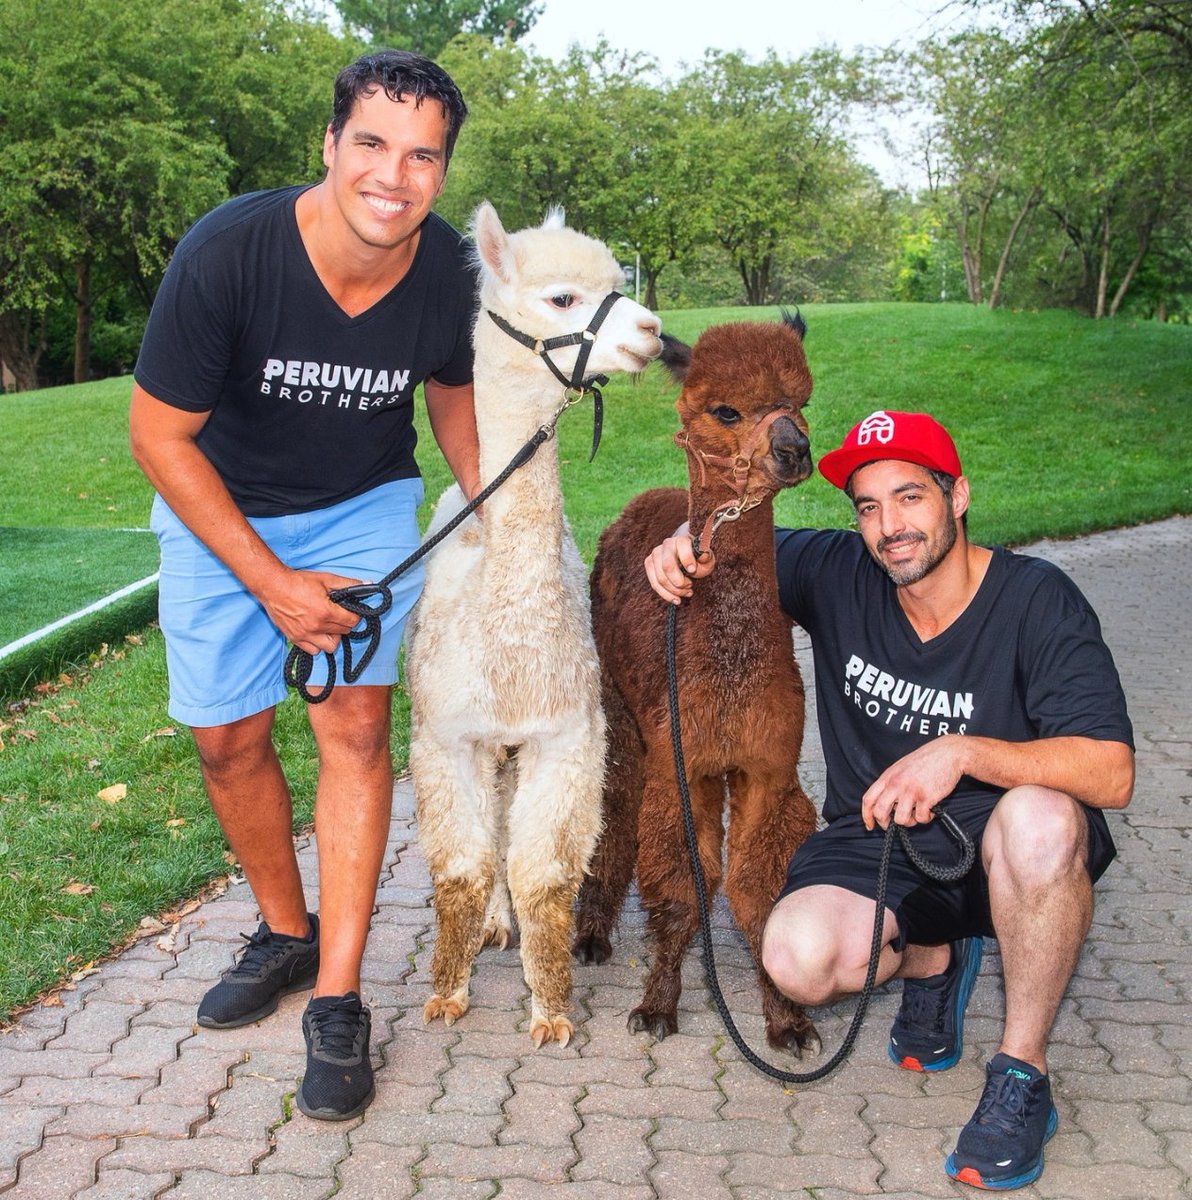 🦙✨ Fridays just got fluffier! Join Peruvian Brothers every Friday in May from 4 to 6 p.m. for some alpaca fun and unbeatable happy hour specials. 🍹🥟 🔗 Learn more: bit.ly/3WjPpDZ #NationalLanding #LoveNationalLanding